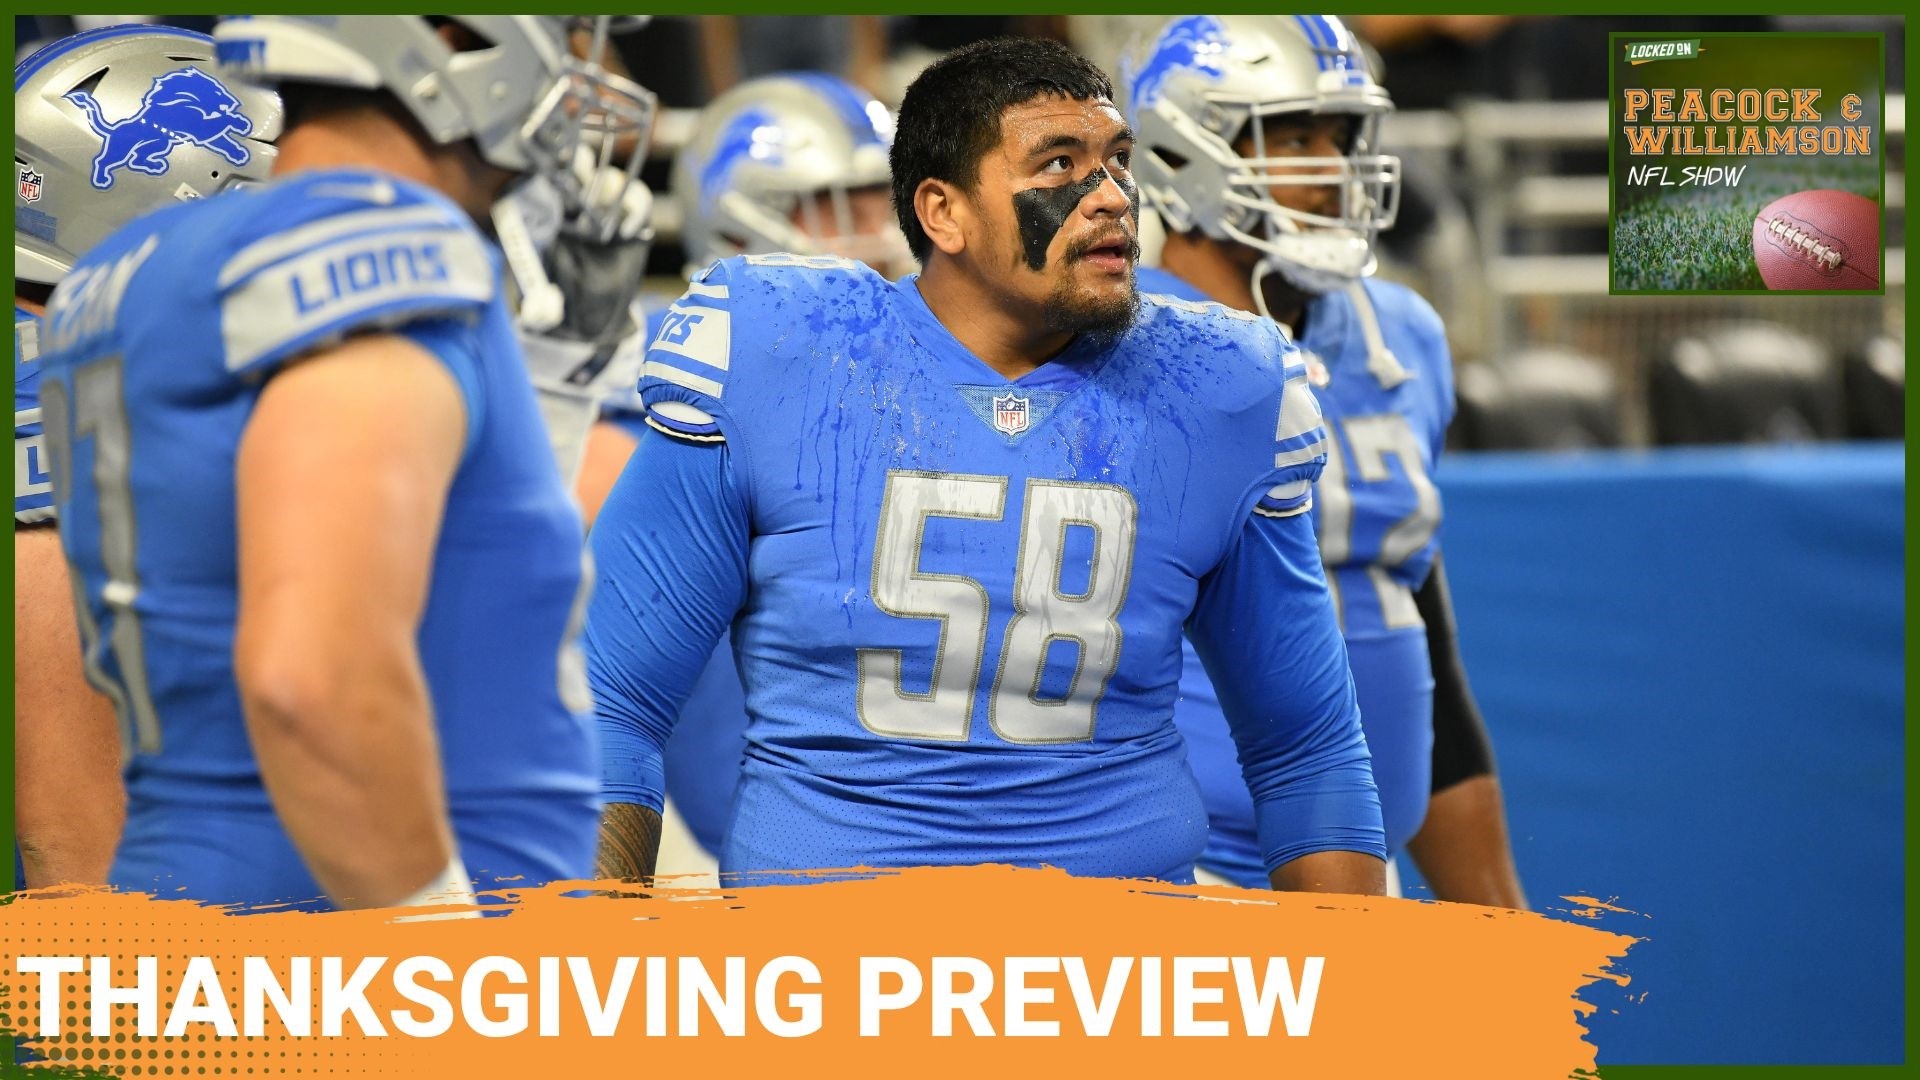 Brian Peacock & Matt Williamson preview the Thanksgiving day NFL games and make their picks for Sunday's games as well.